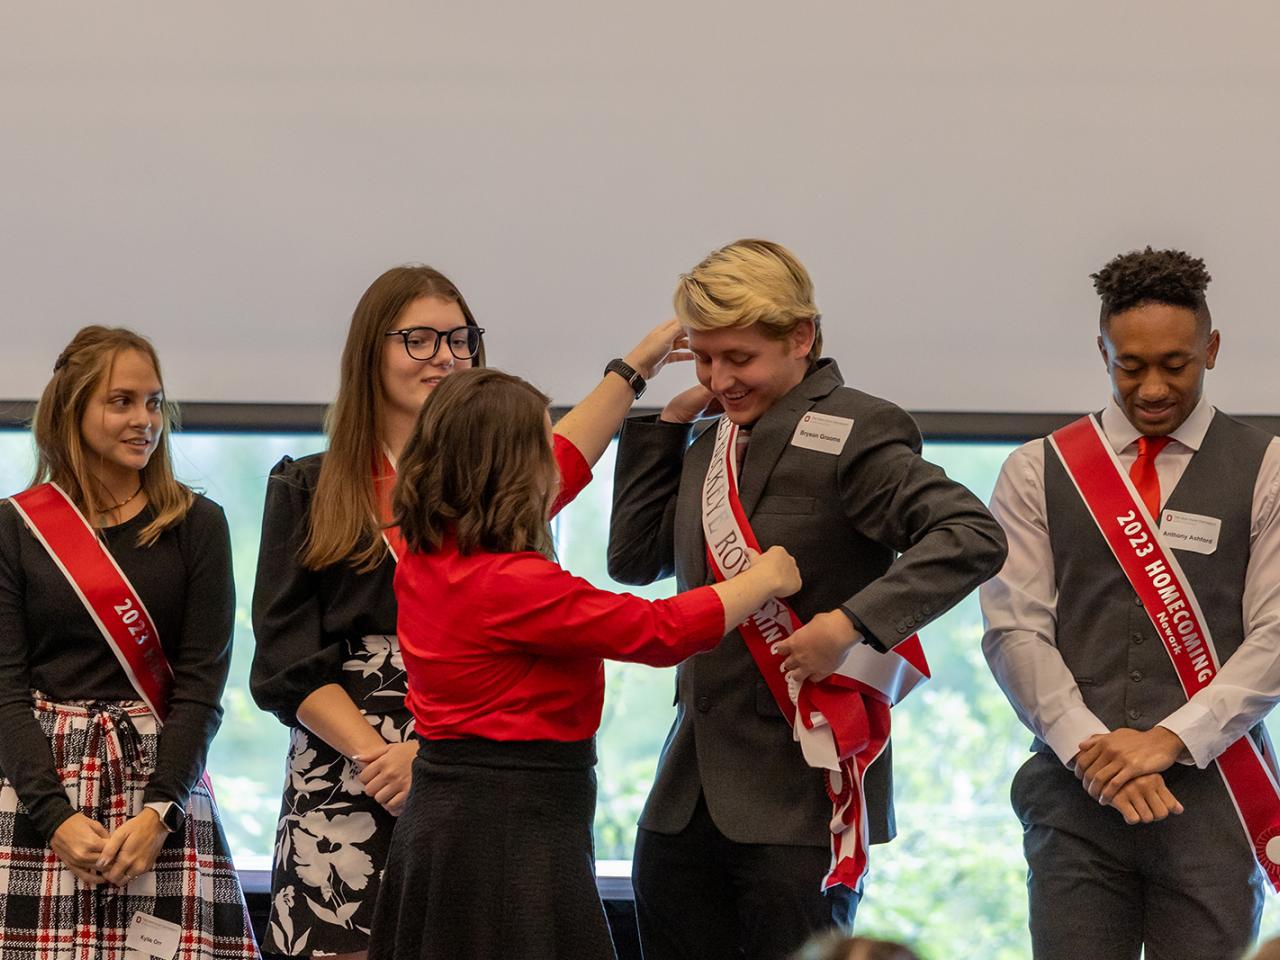 A staff member places the royal Buckeye sash on Bryson Grooms.